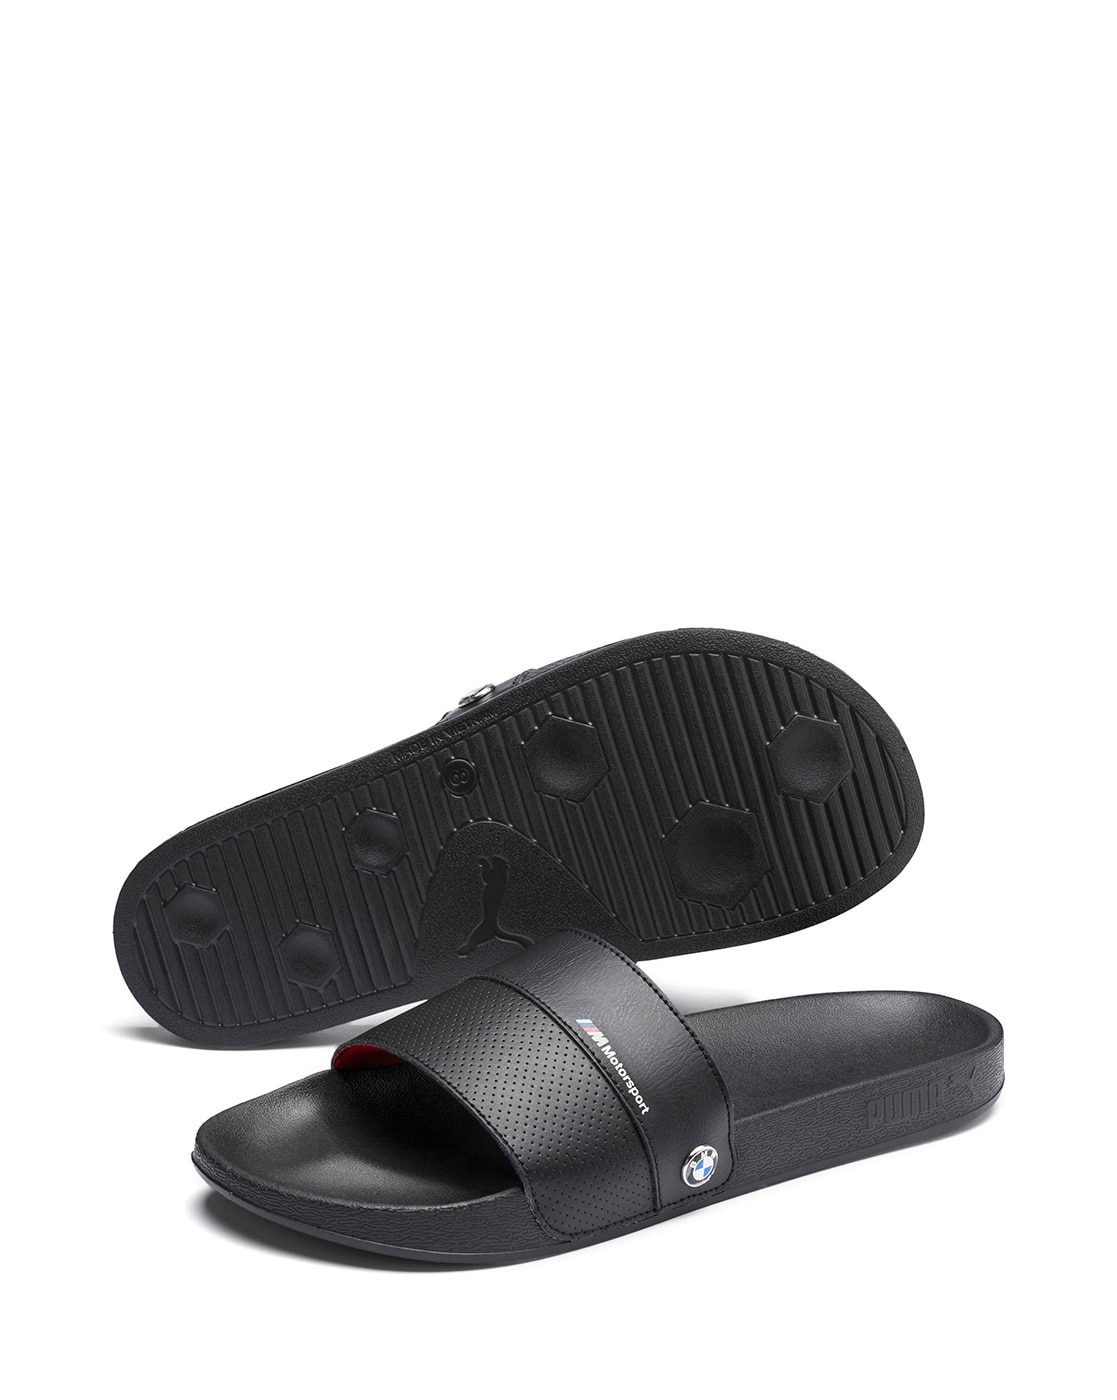 puma slippers online sale india